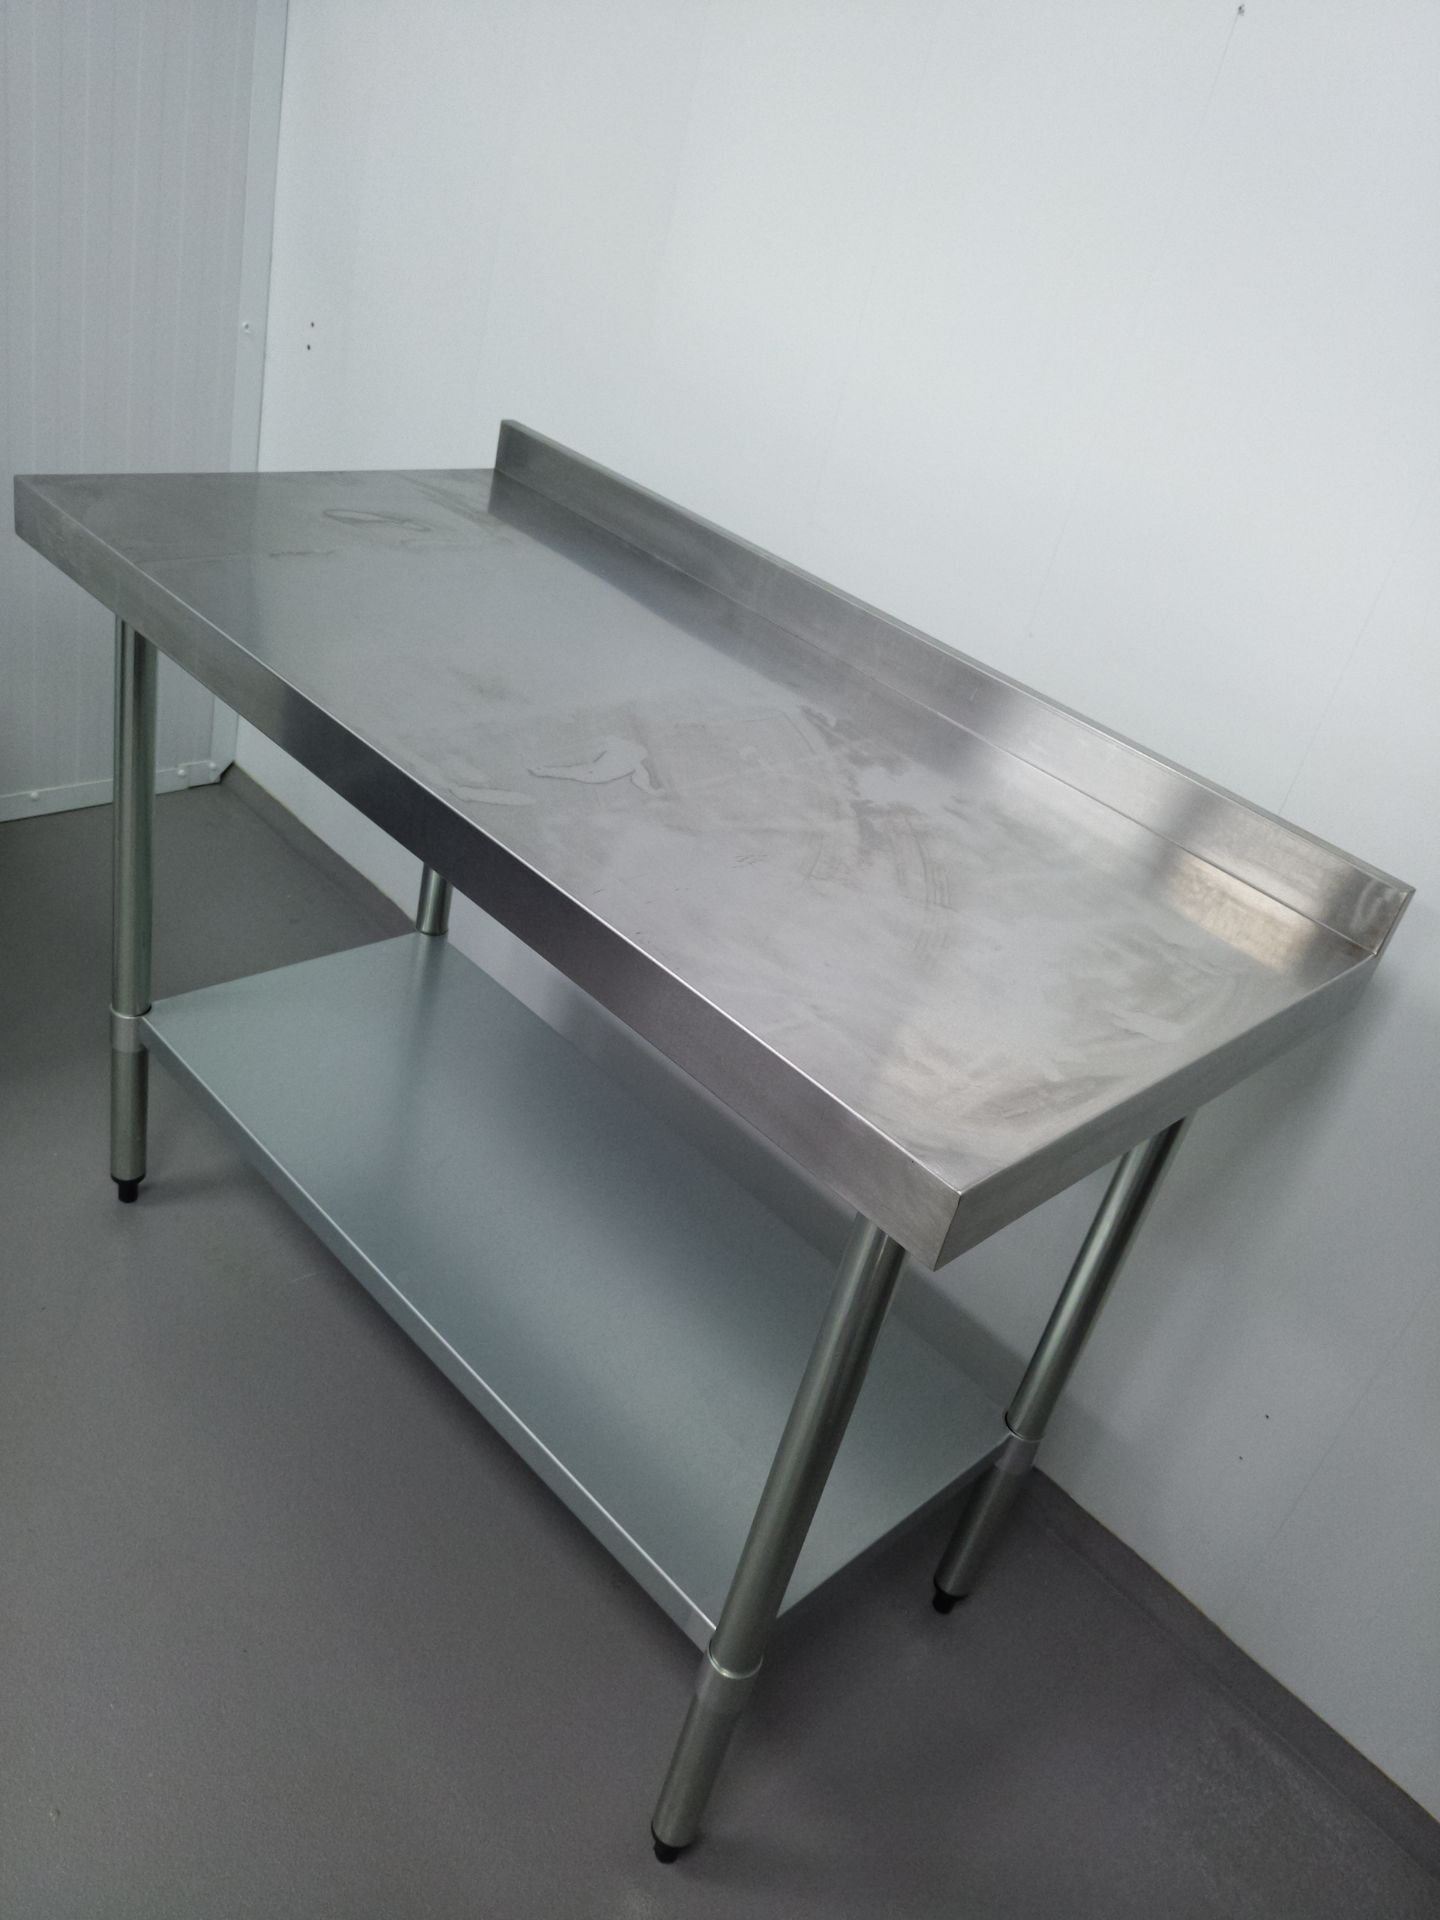 Vogue Stainless Steel Table with Upstand 1200mm - Image 2 of 2